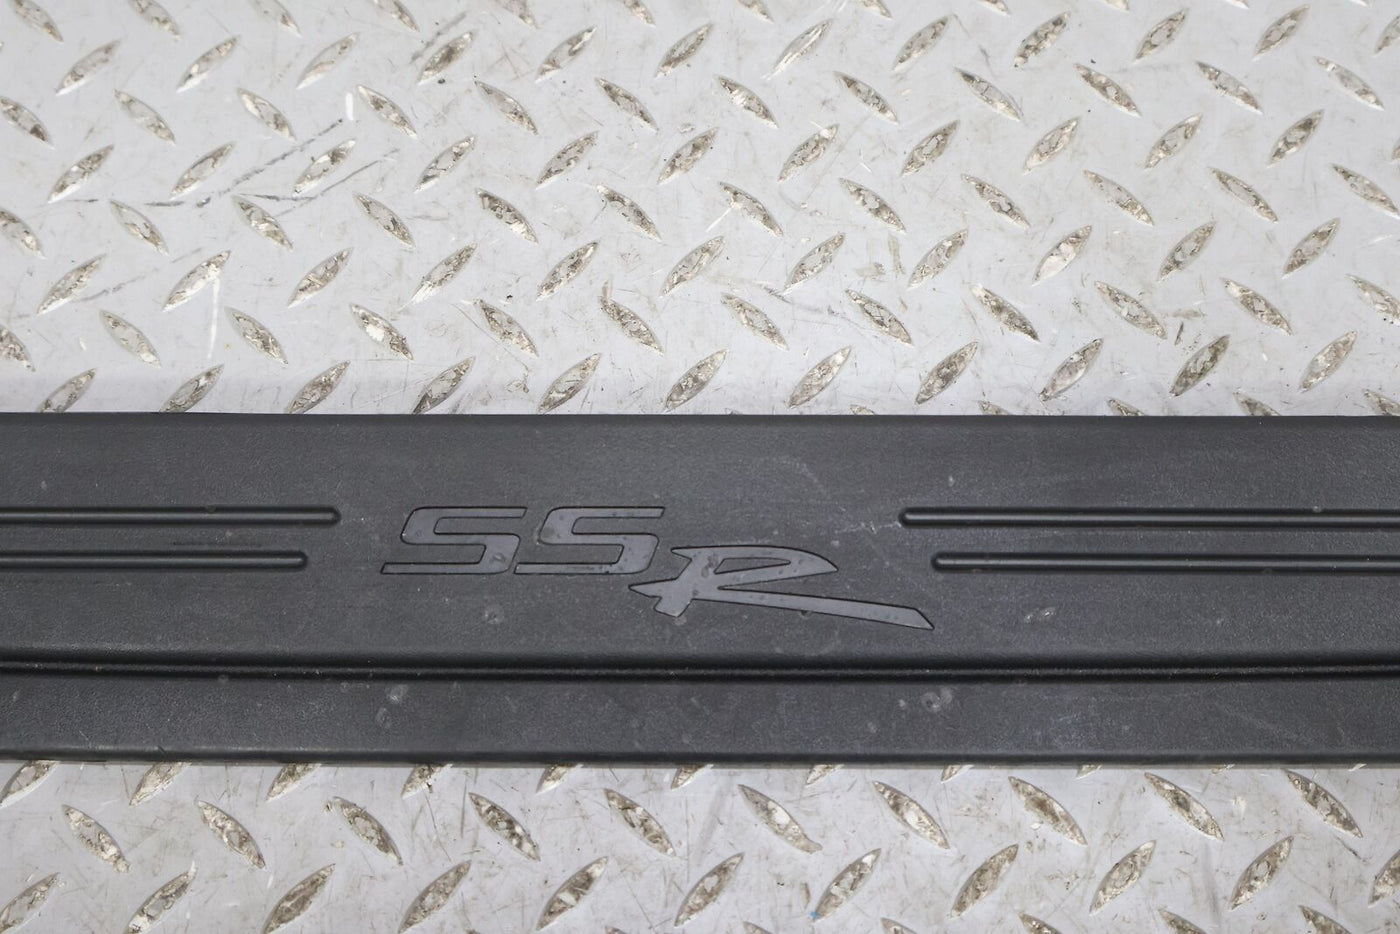 03-06 Chevy SSR Pair LH & RH Outer Door Sill Entry Plates (Ebony 19i)